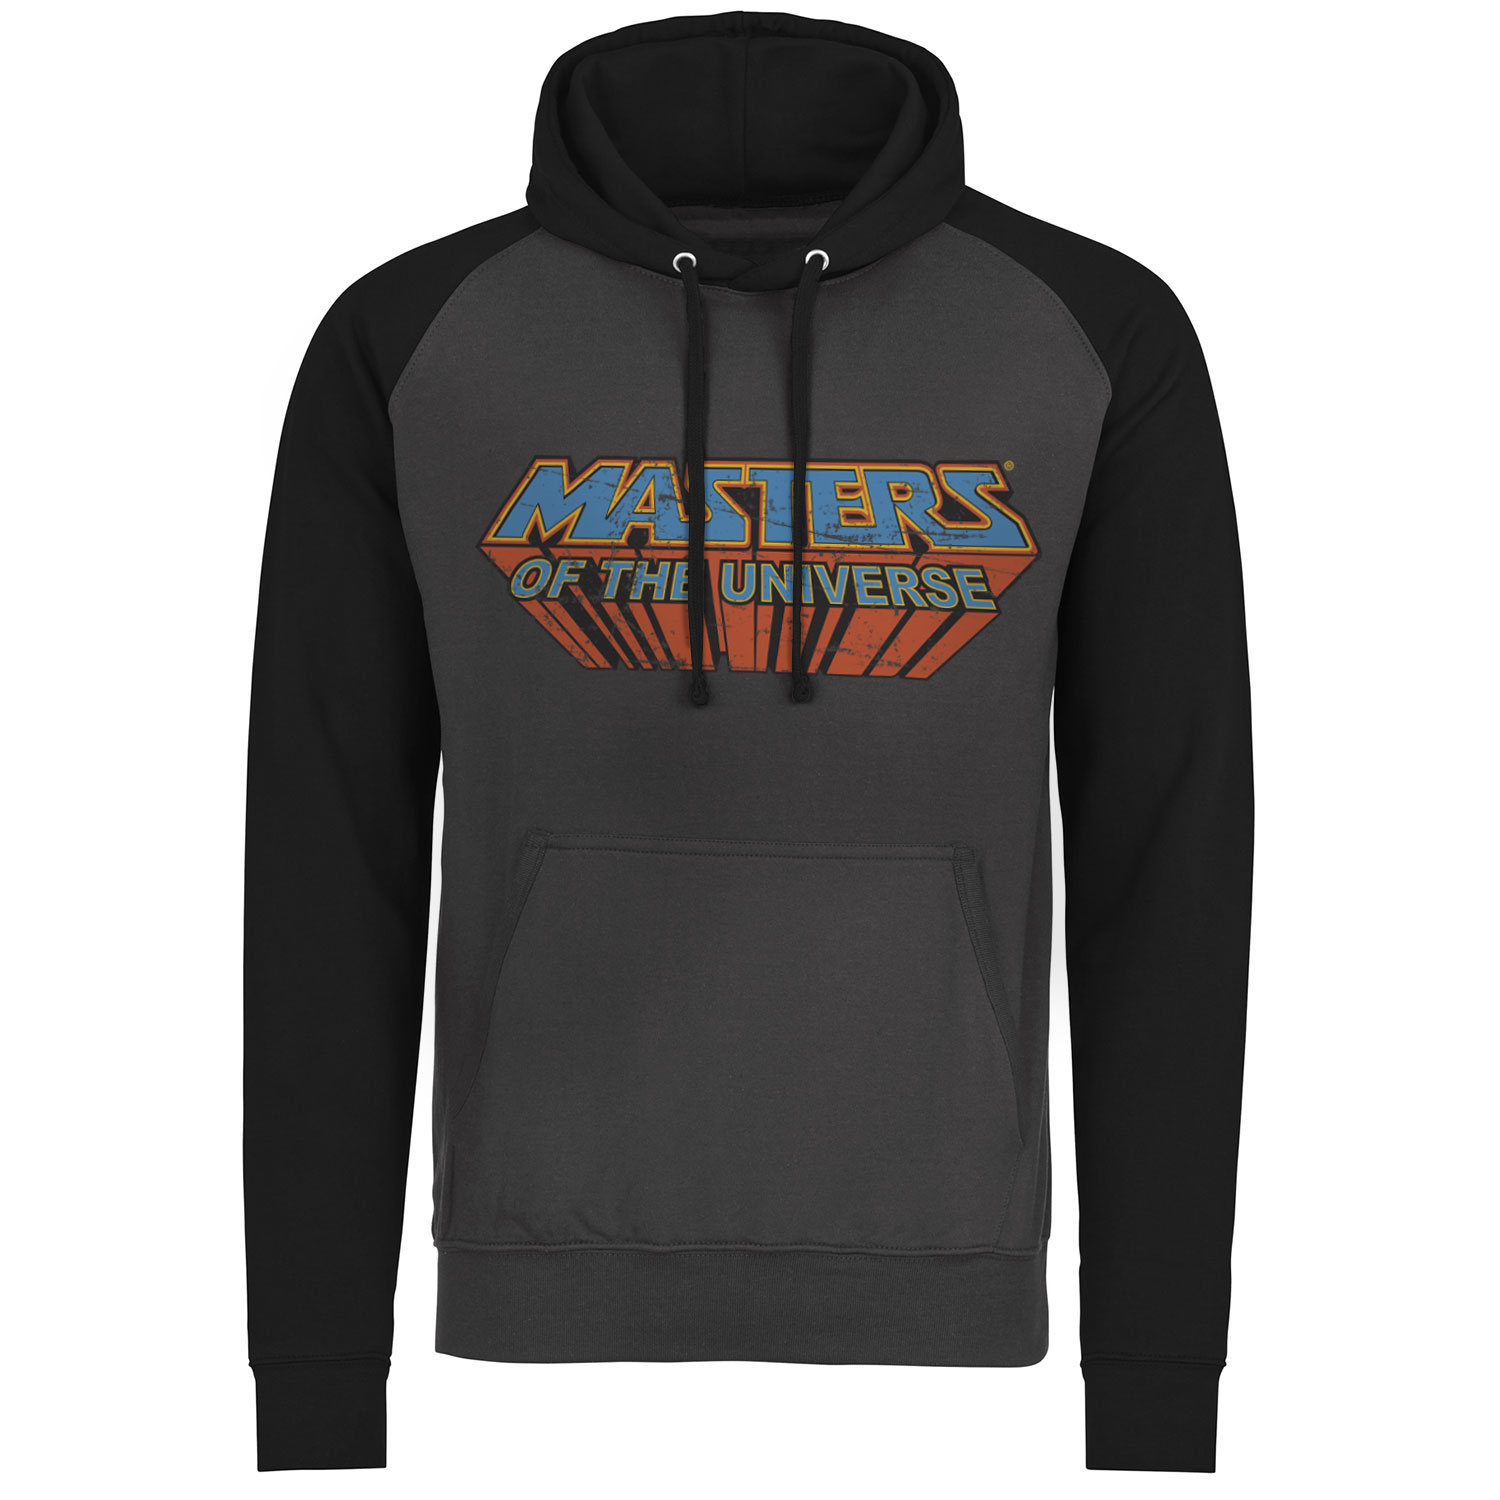 MASTERS OF THE UNIVERSE: Washed Logo Baseball Hoodie (charcoal/black)